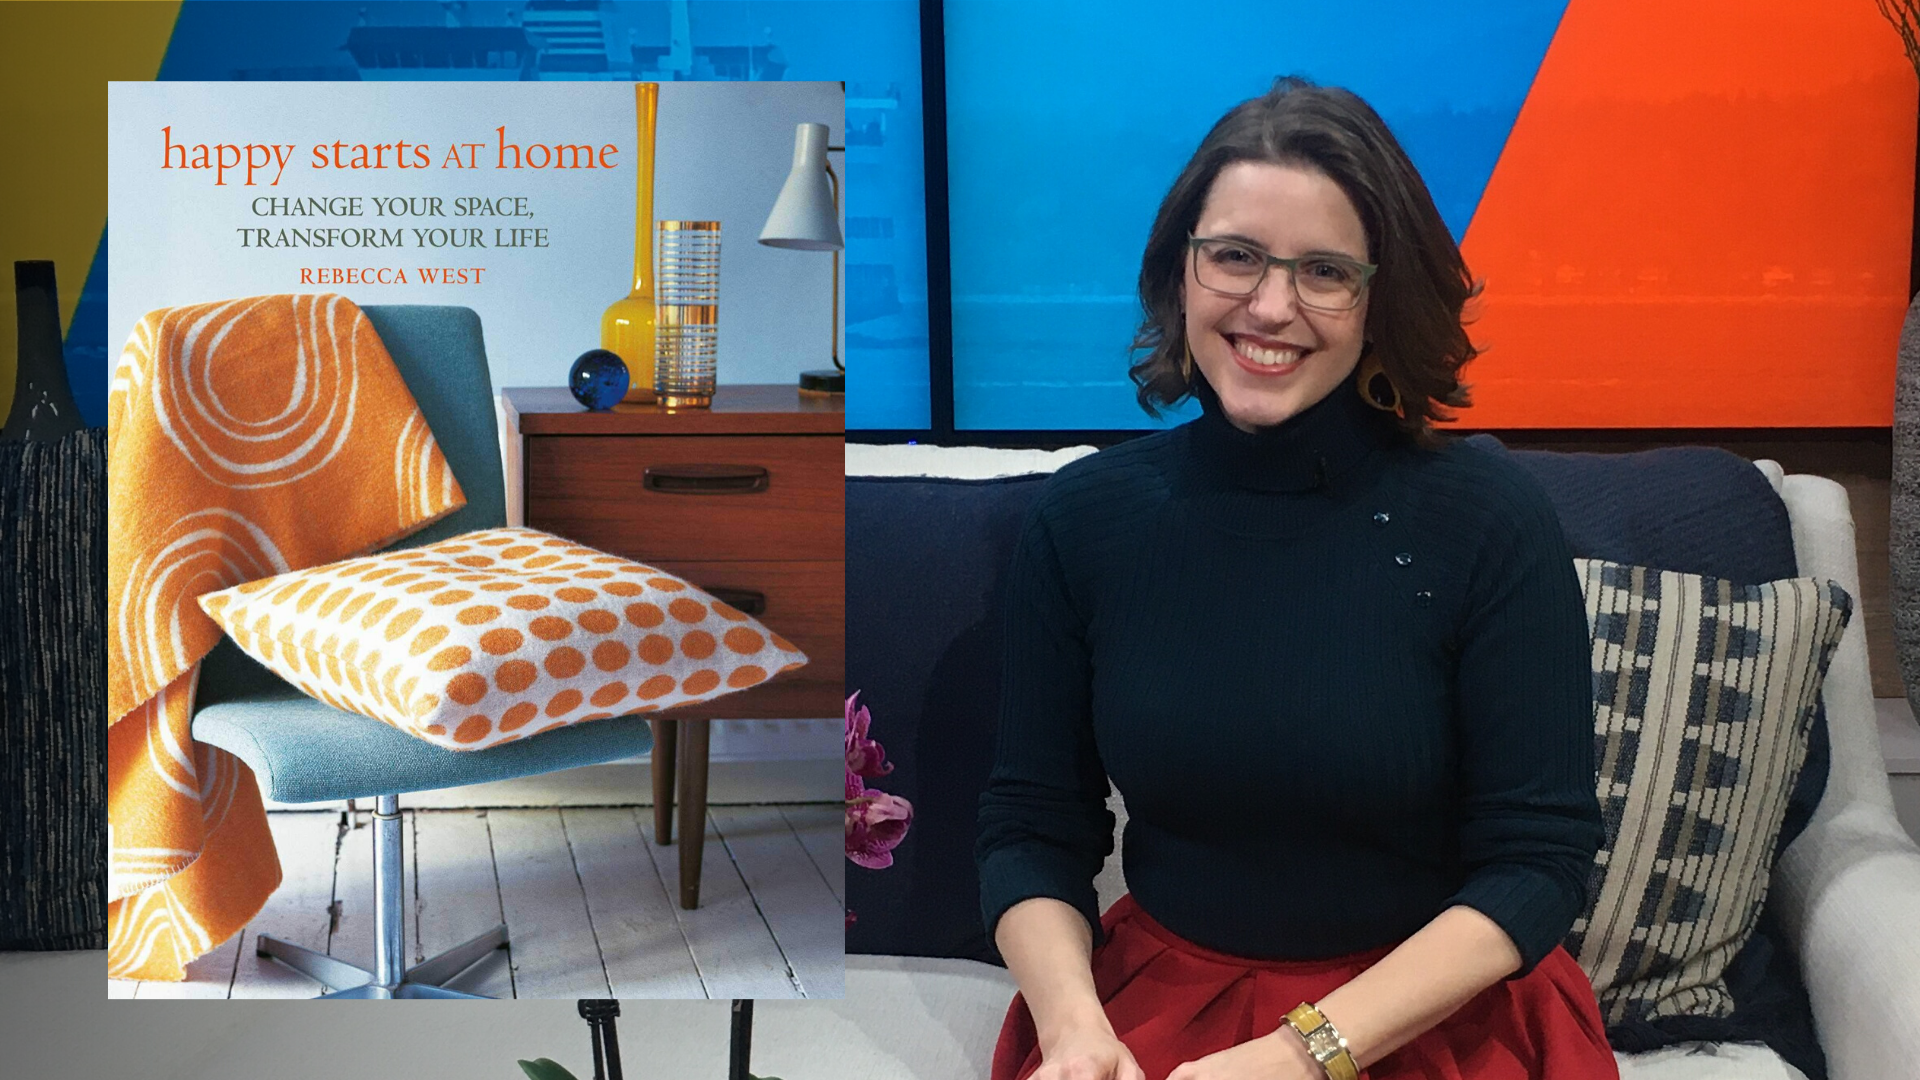 Interior designer Rebecca West's new book "Happy Starts at Home" gives ideas for small changes you can make to your living space that support, not sabotage.